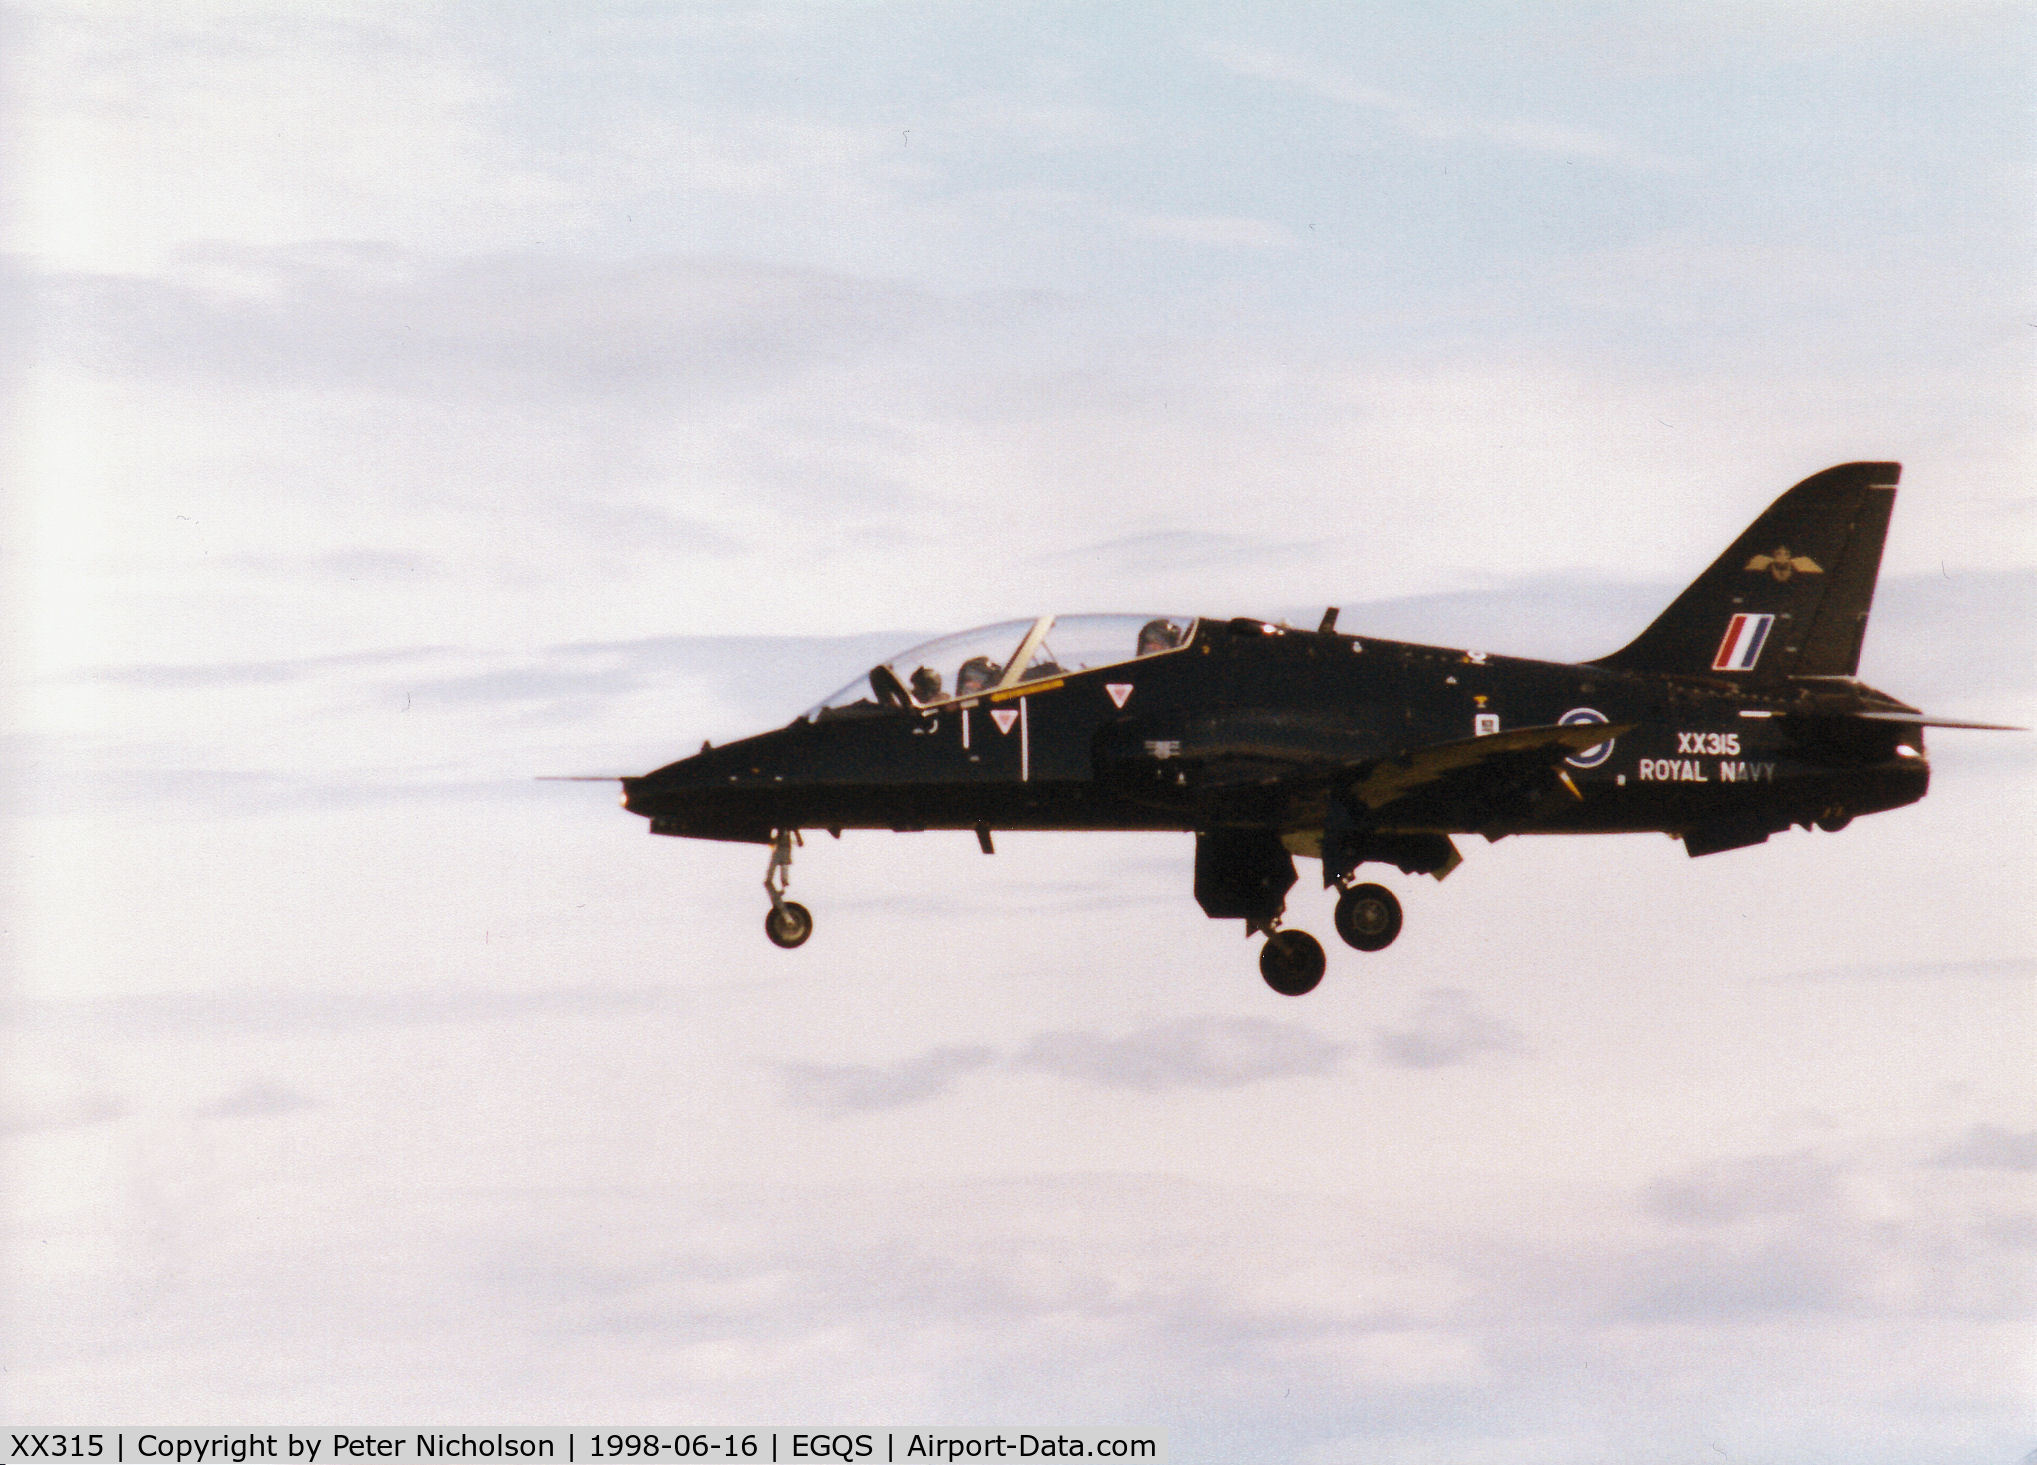 XX315, 1980 Hawker Siddeley Hawk T.1A C/N 156/312140, Hawk T.1A, callsign Ghost One Charlie, of the Fleet Requirements and Air Direction Unit - FRADU - landing on Runway 05 at RAF Lossiemouth after a mission during the 1998 Joint Maritime Course.